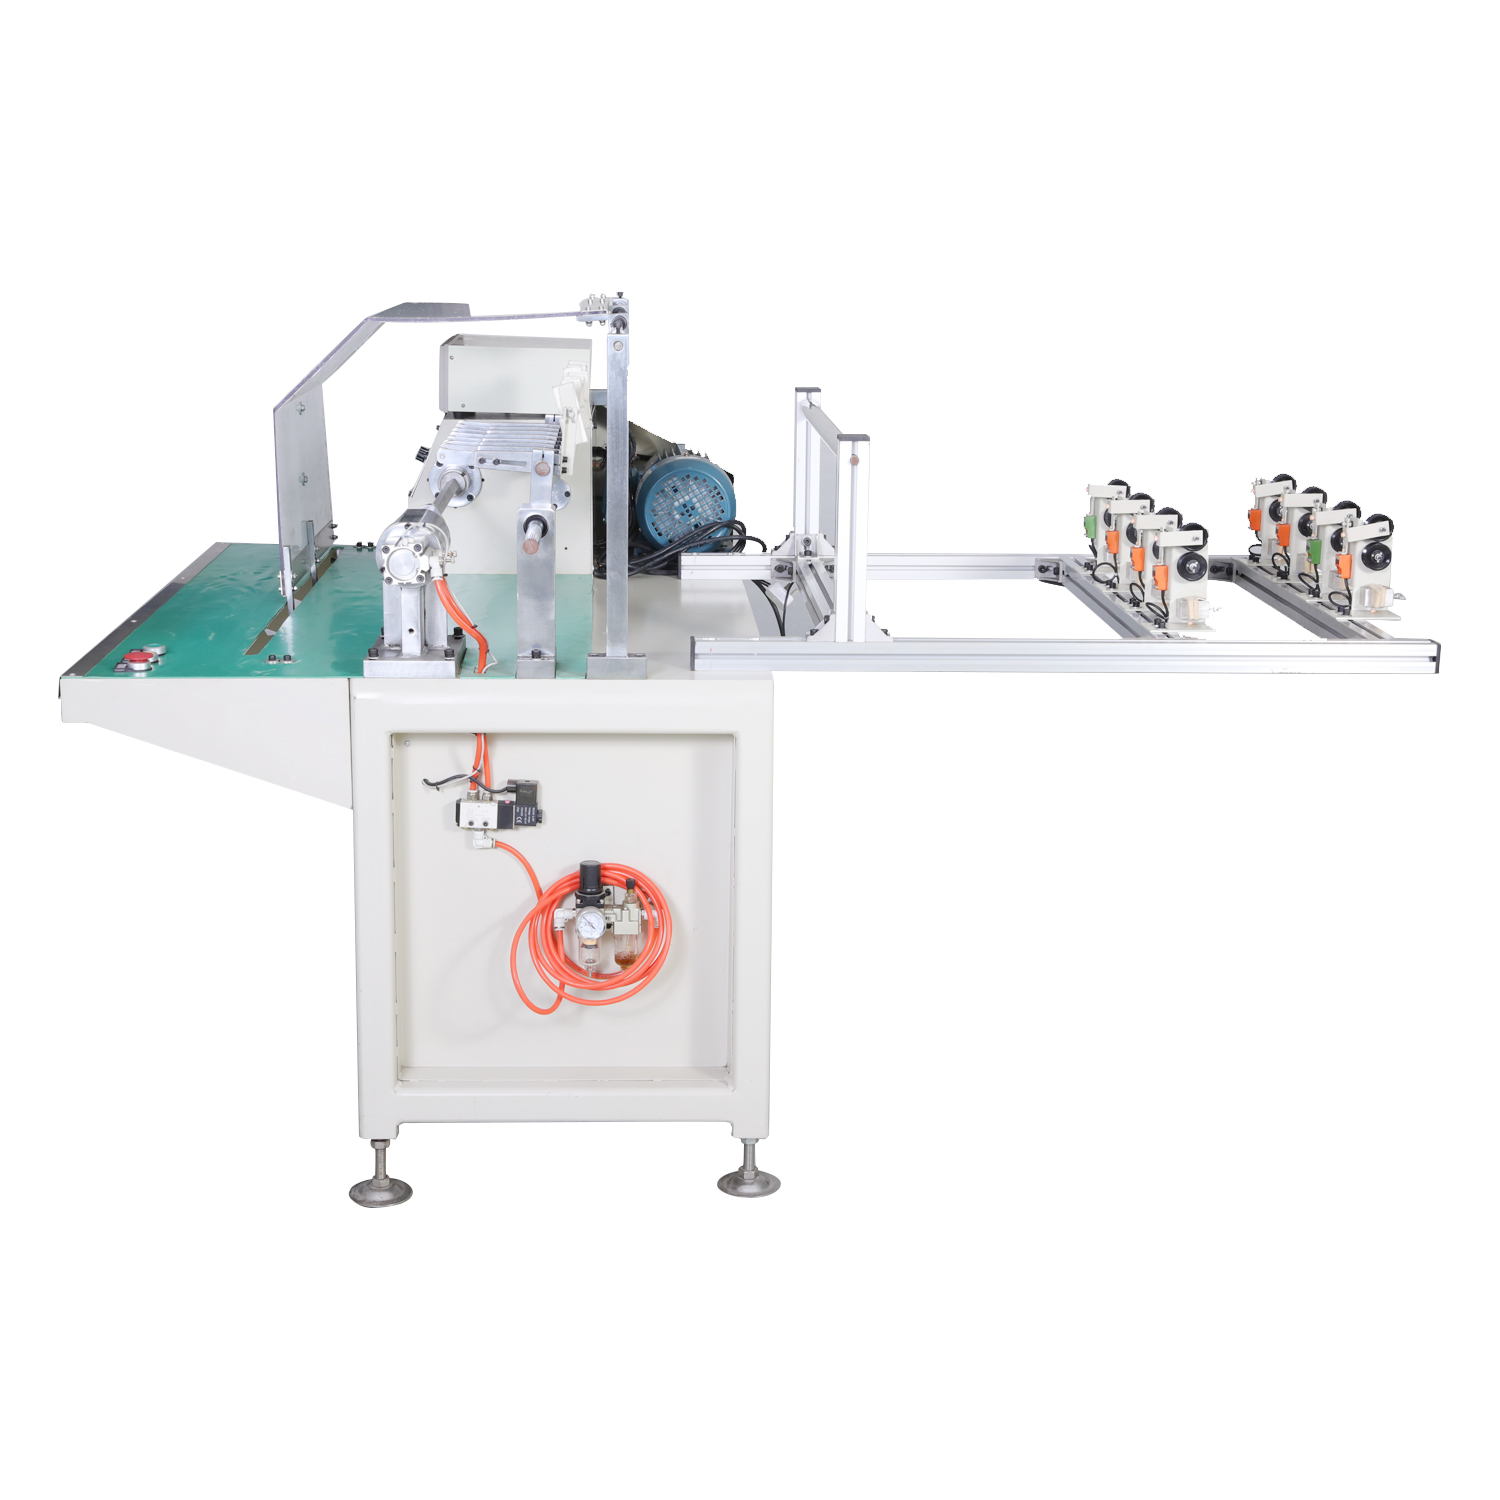 Simply stator coil winding machine (8)